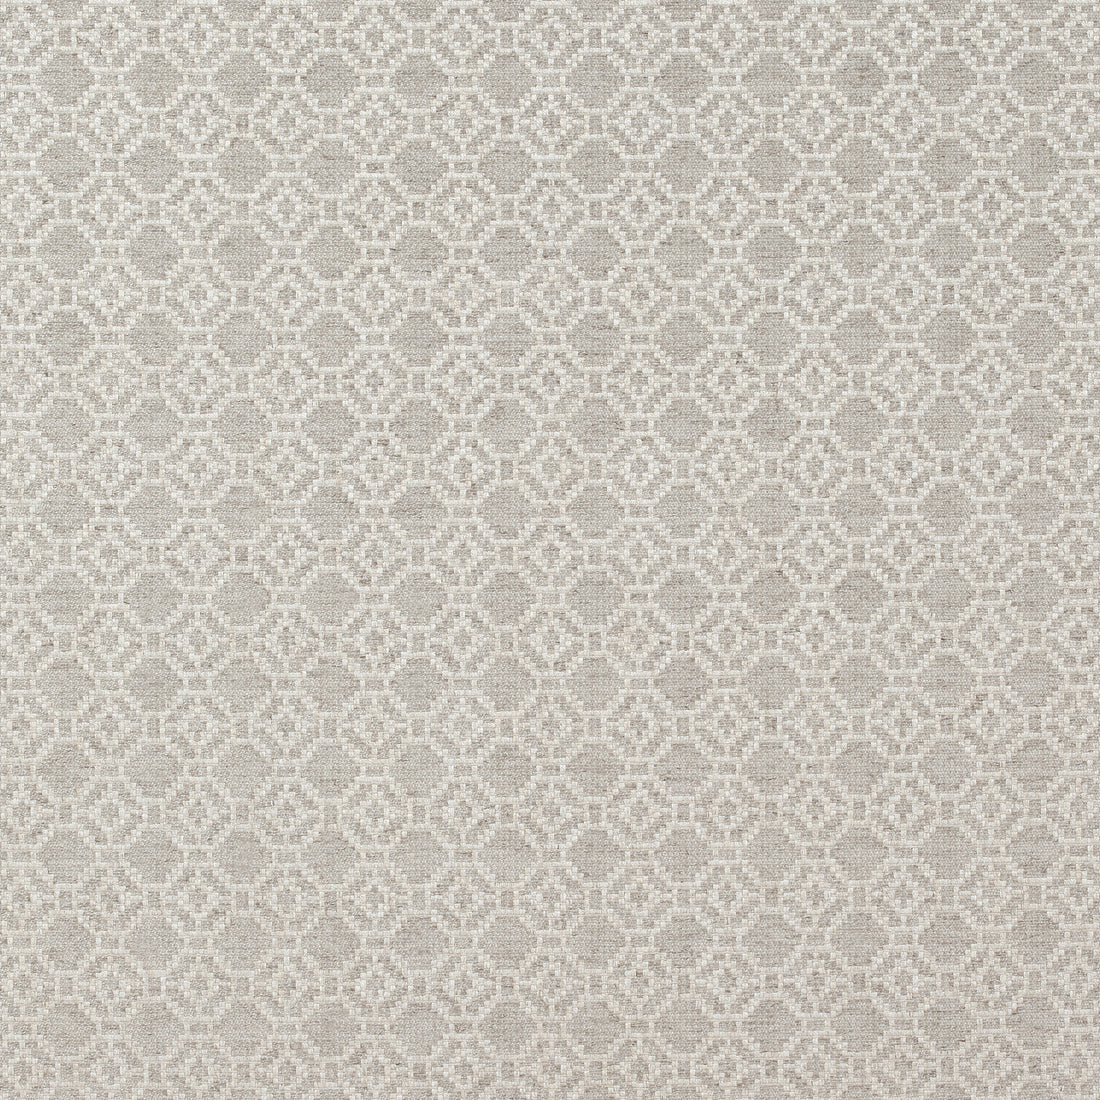 Amalfi fabric in beige color - pattern number AW73040 - by Anna French in the Meridian collection